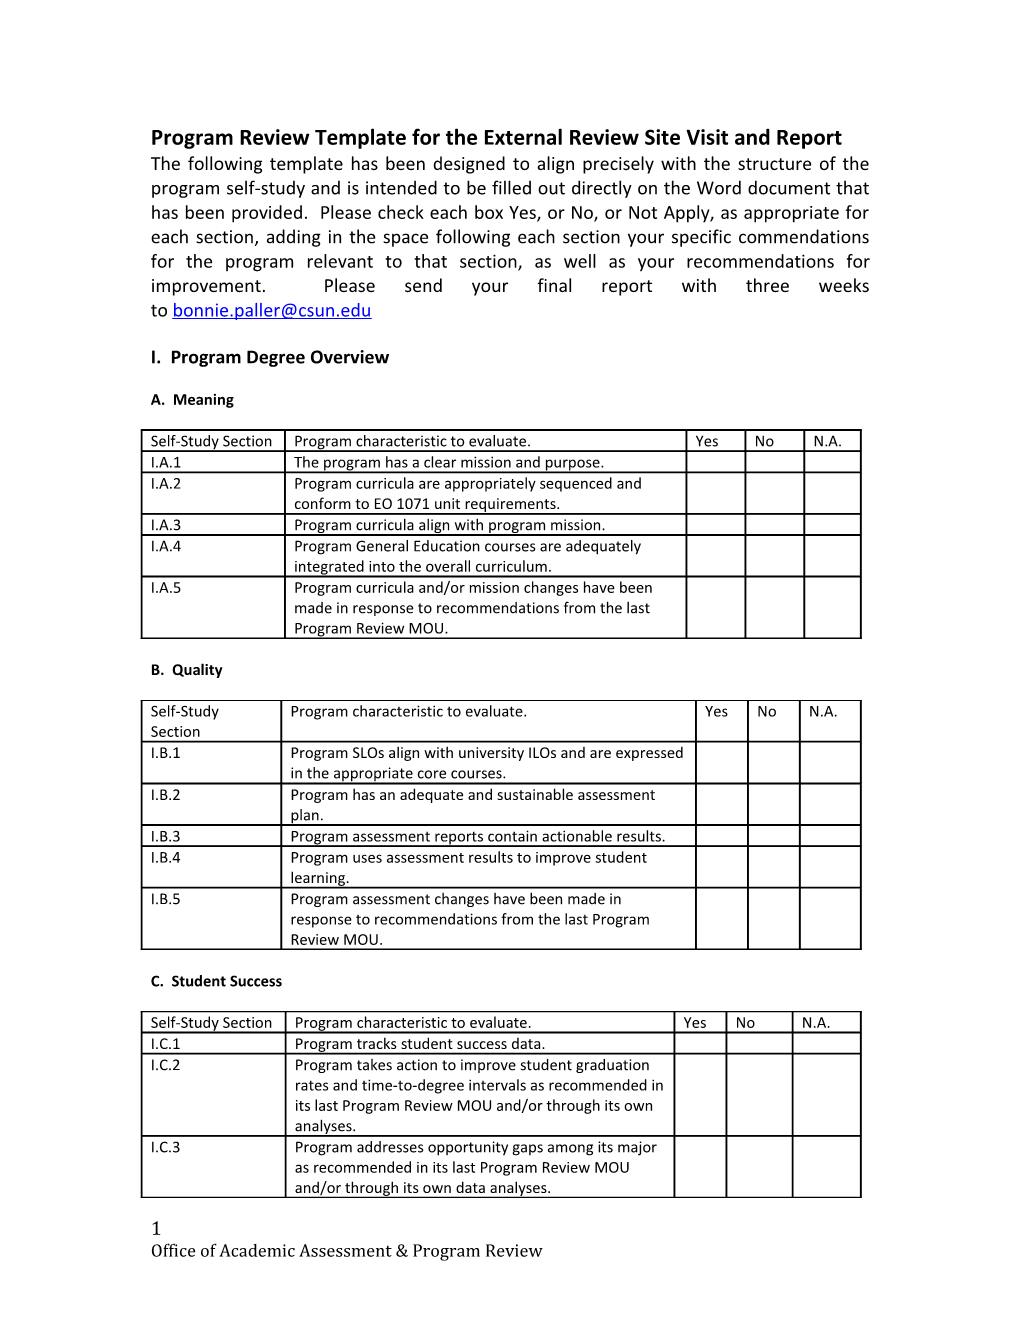 Program Review Template for the External Review Site Visit and Report